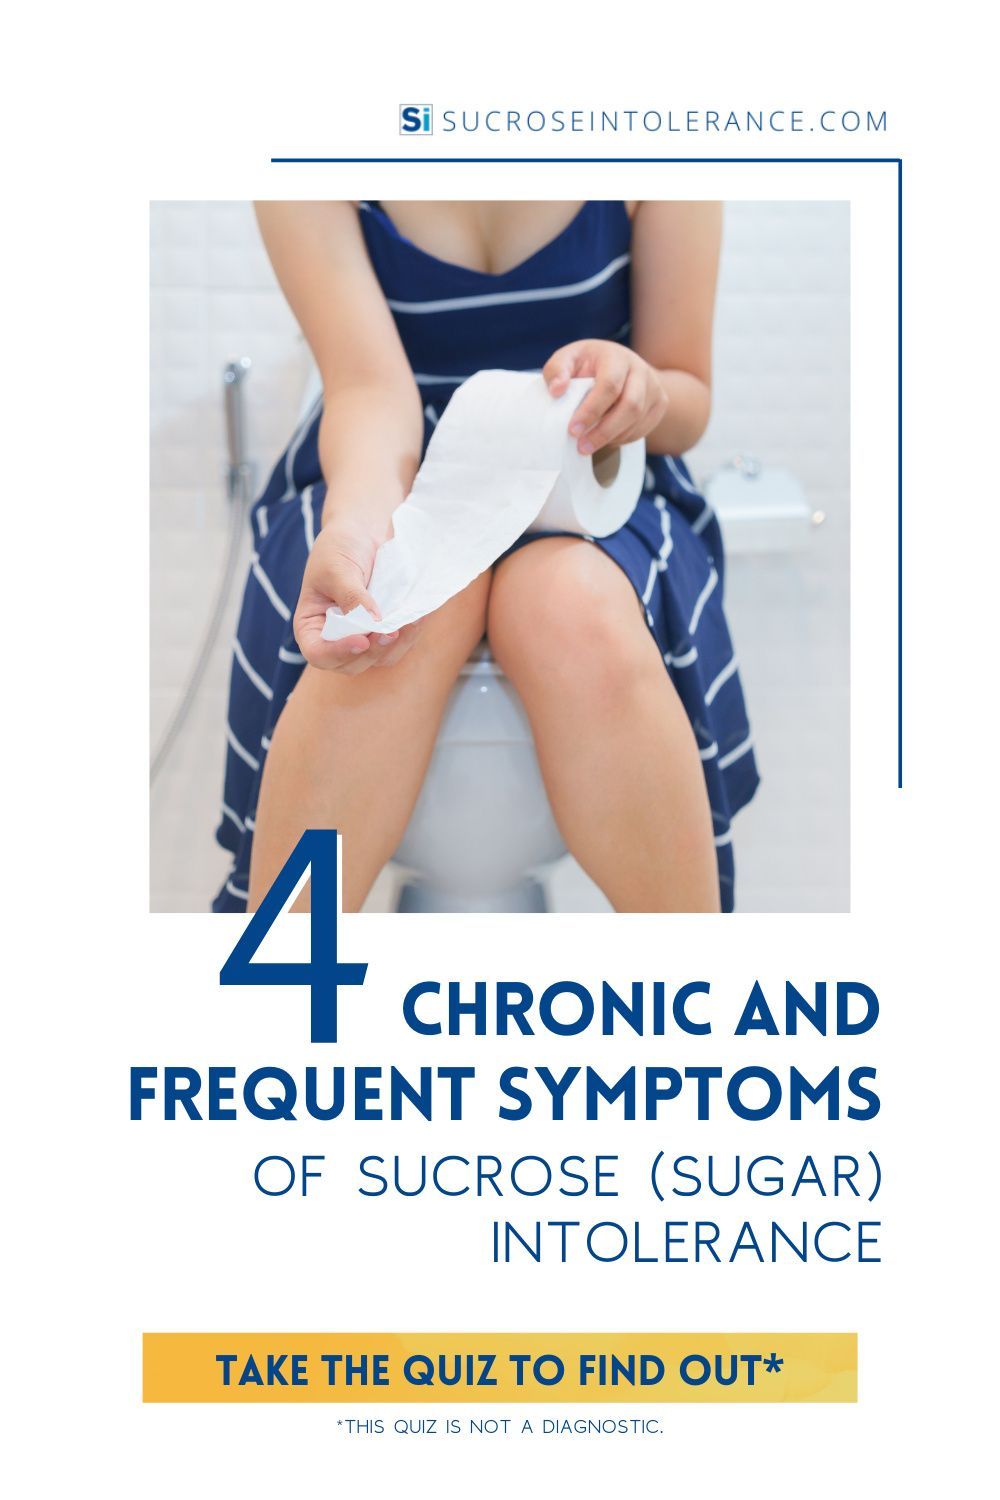 4 Chronic and Frequent Symptoms of Sucrose (Sugar) Intolerance.